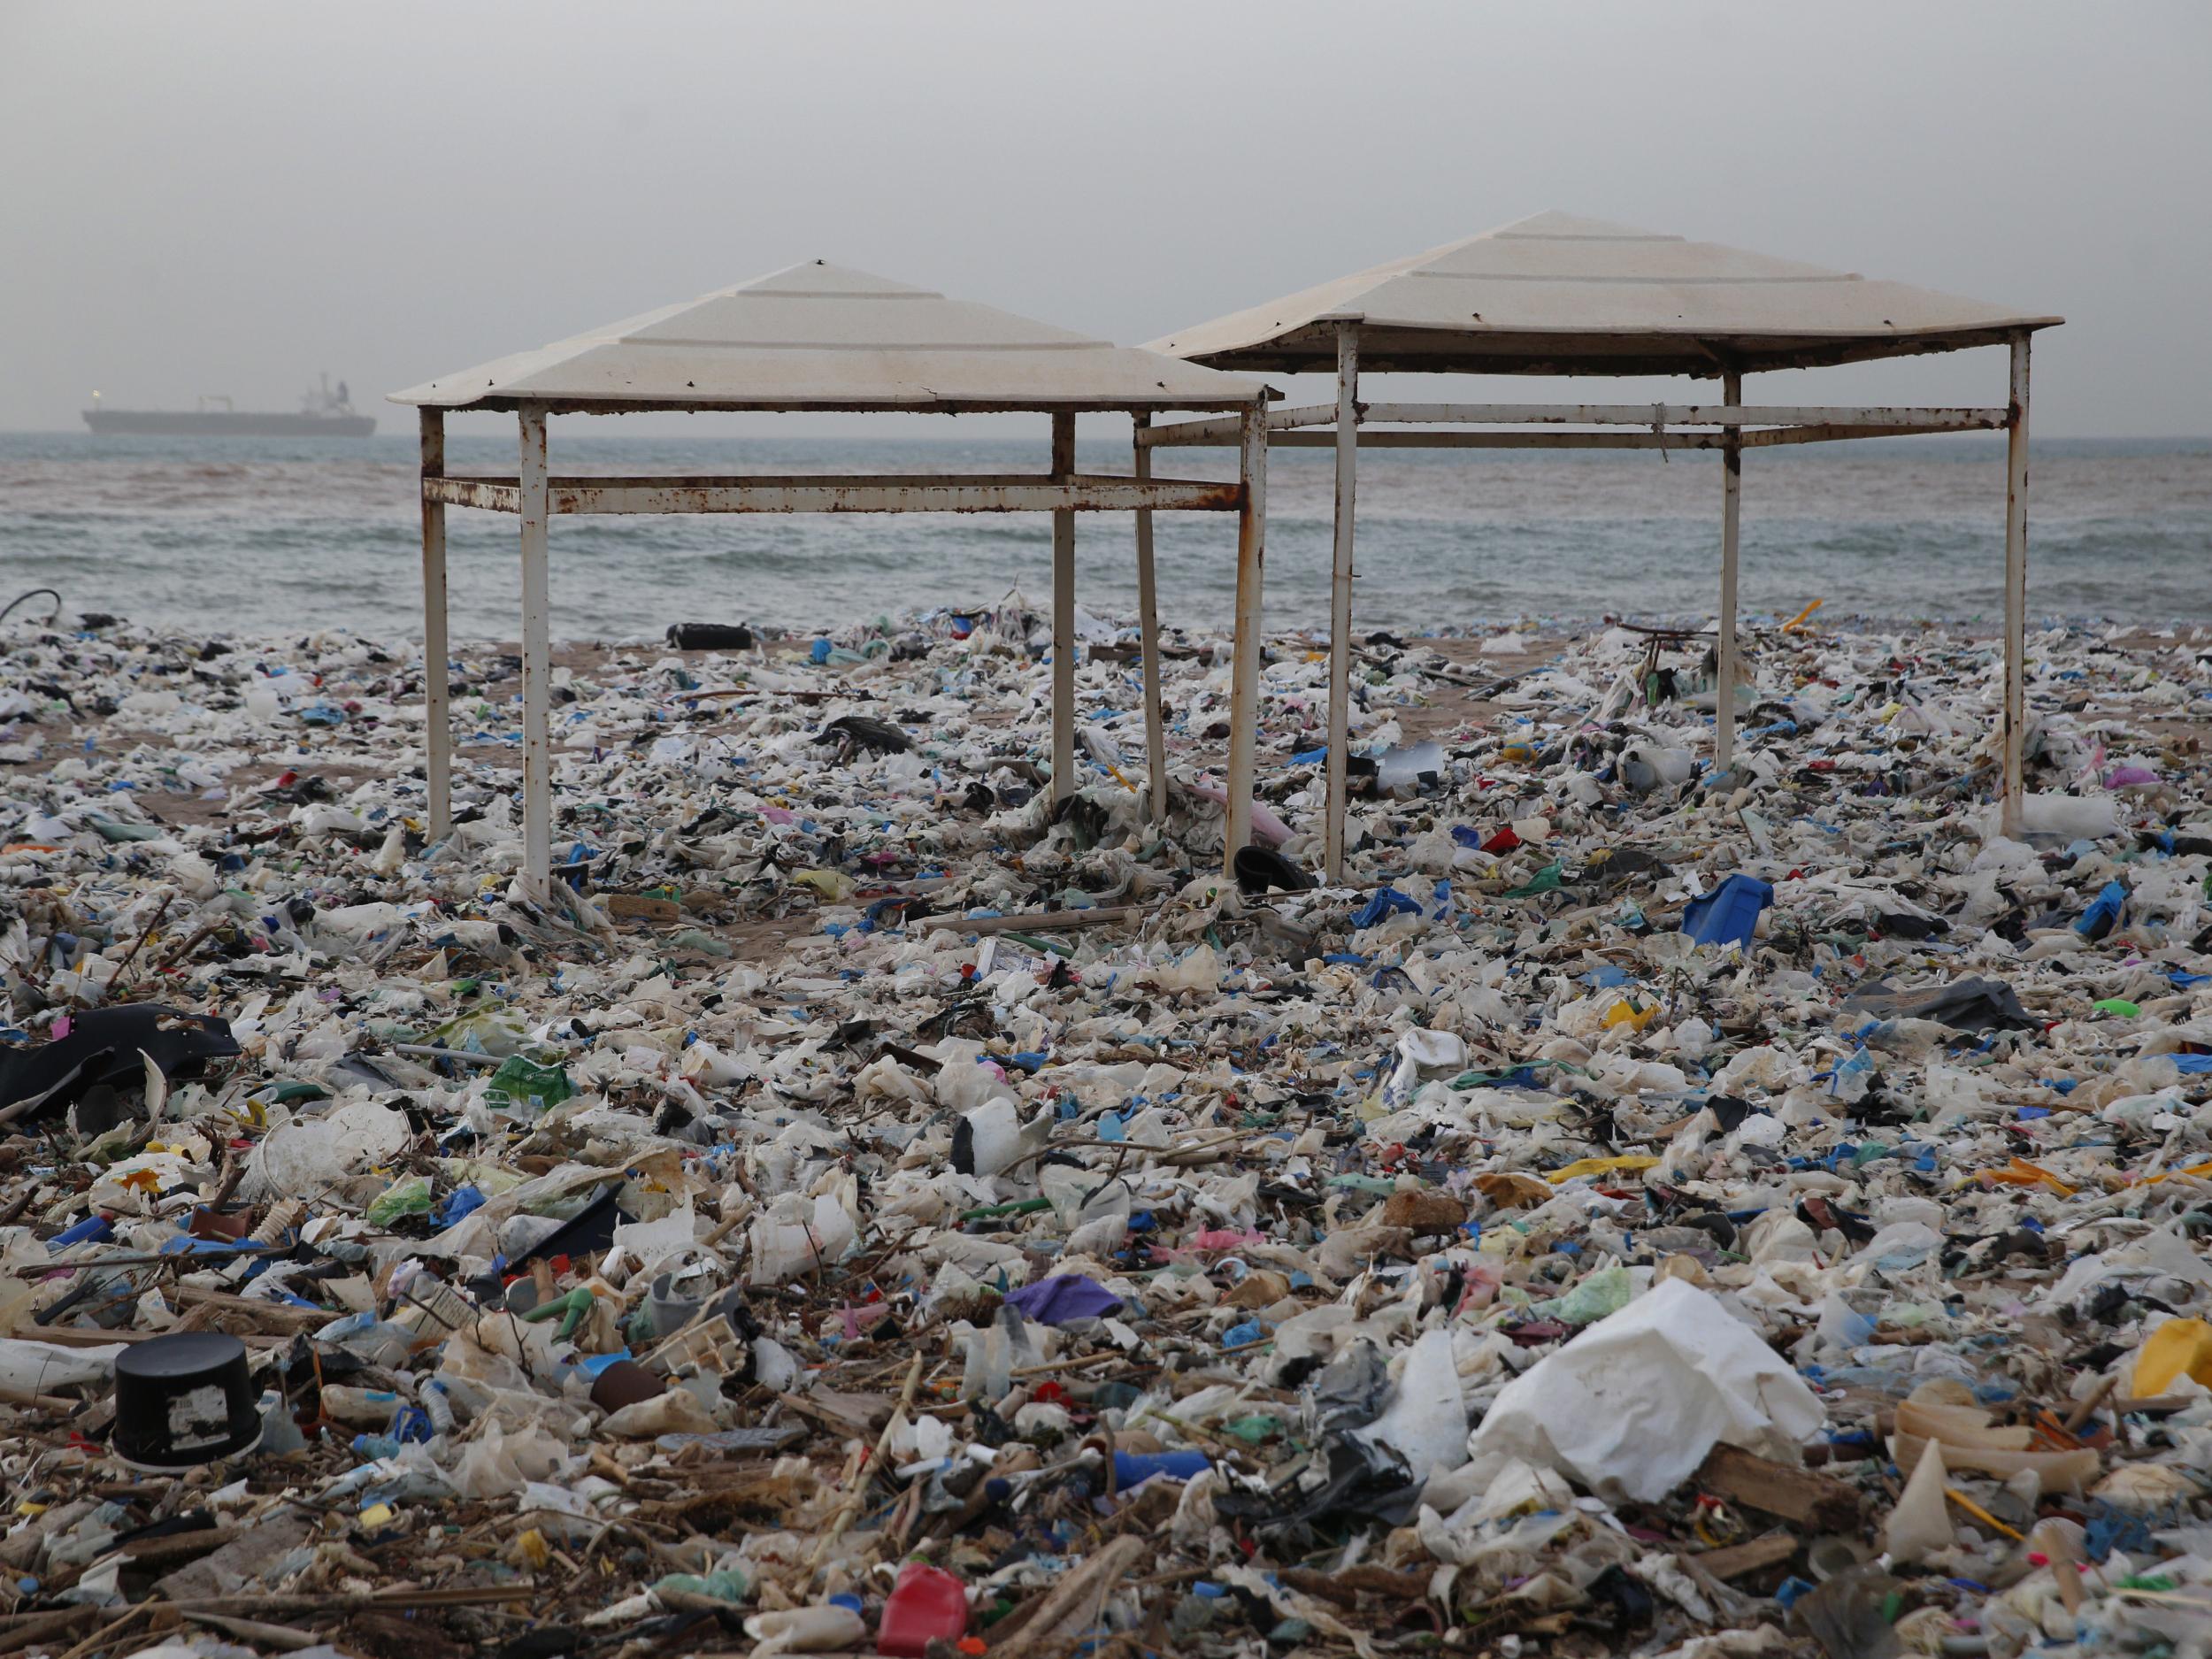 Lebanon Huge piles of rubbish wash up on beach near Beirut amid national waste crisis The Independent The Independent image